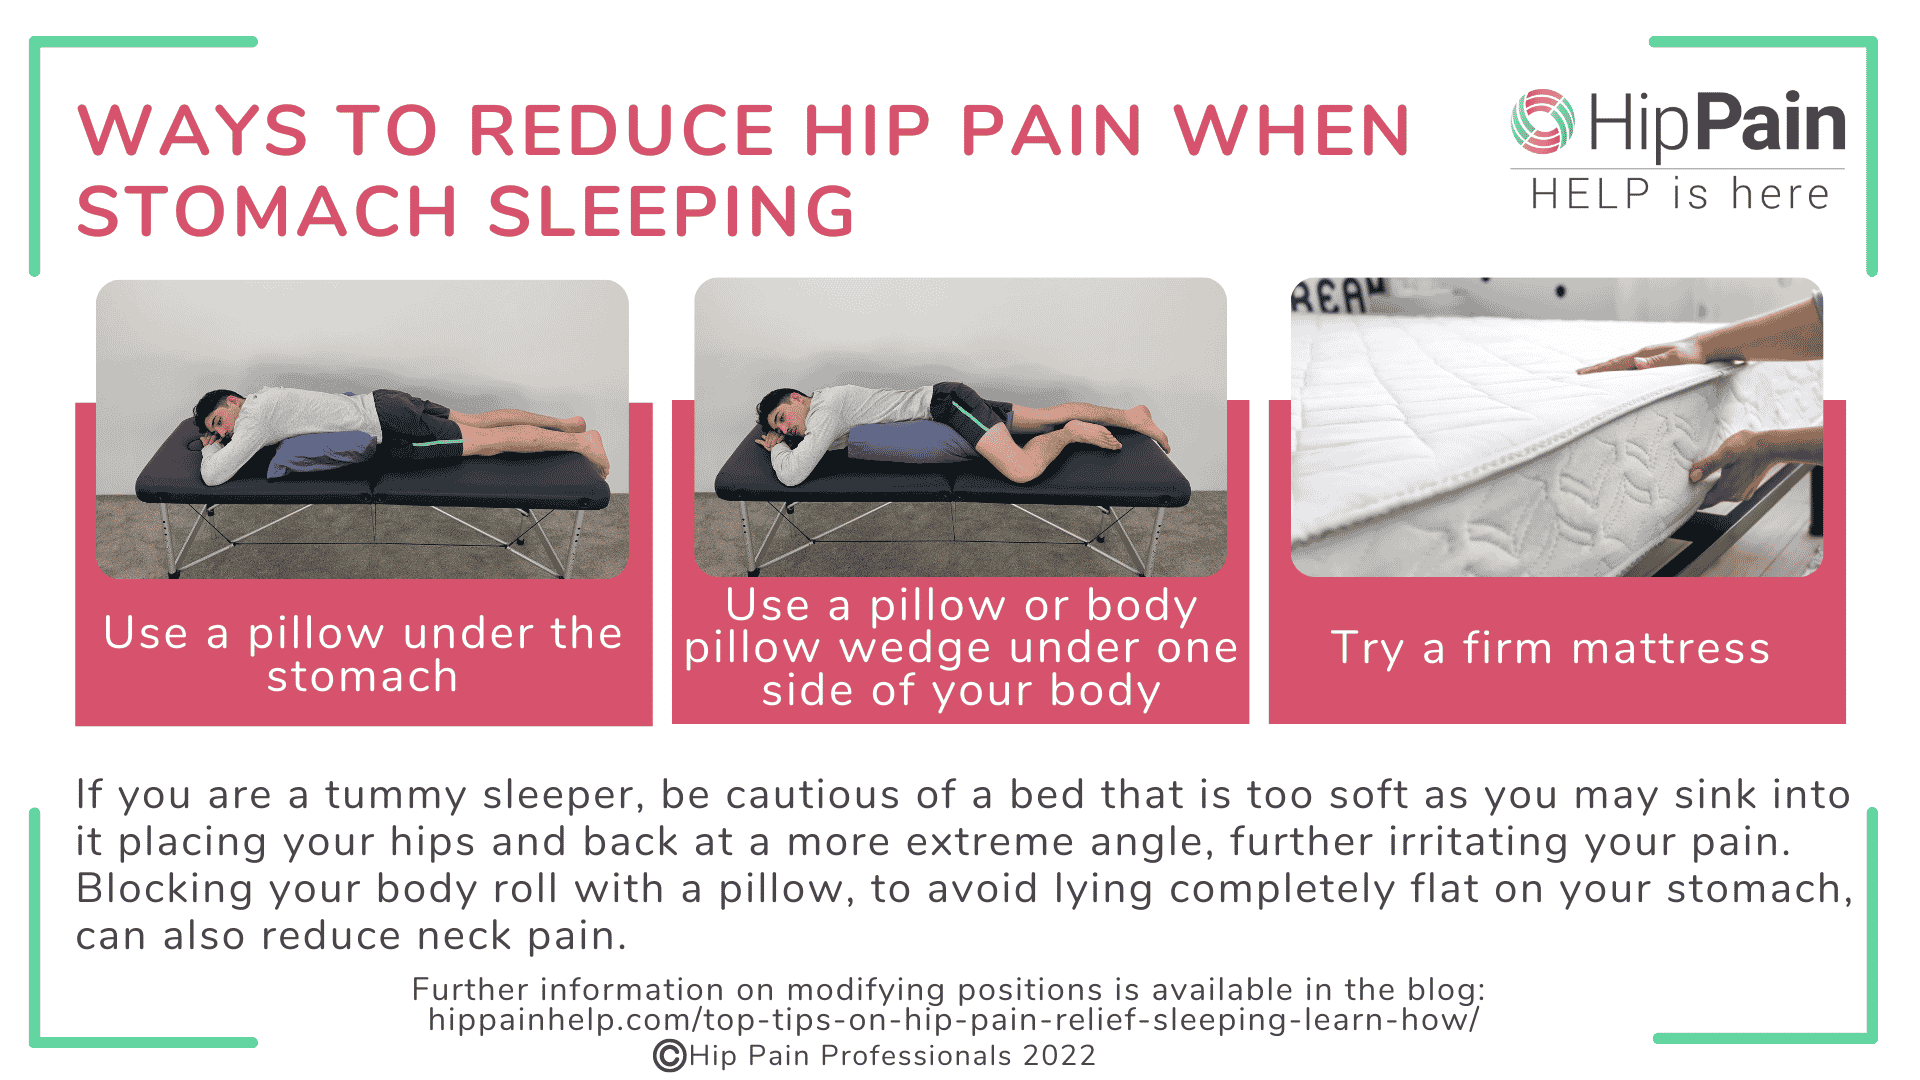 How to Prevent Hip Pain When Sleeping